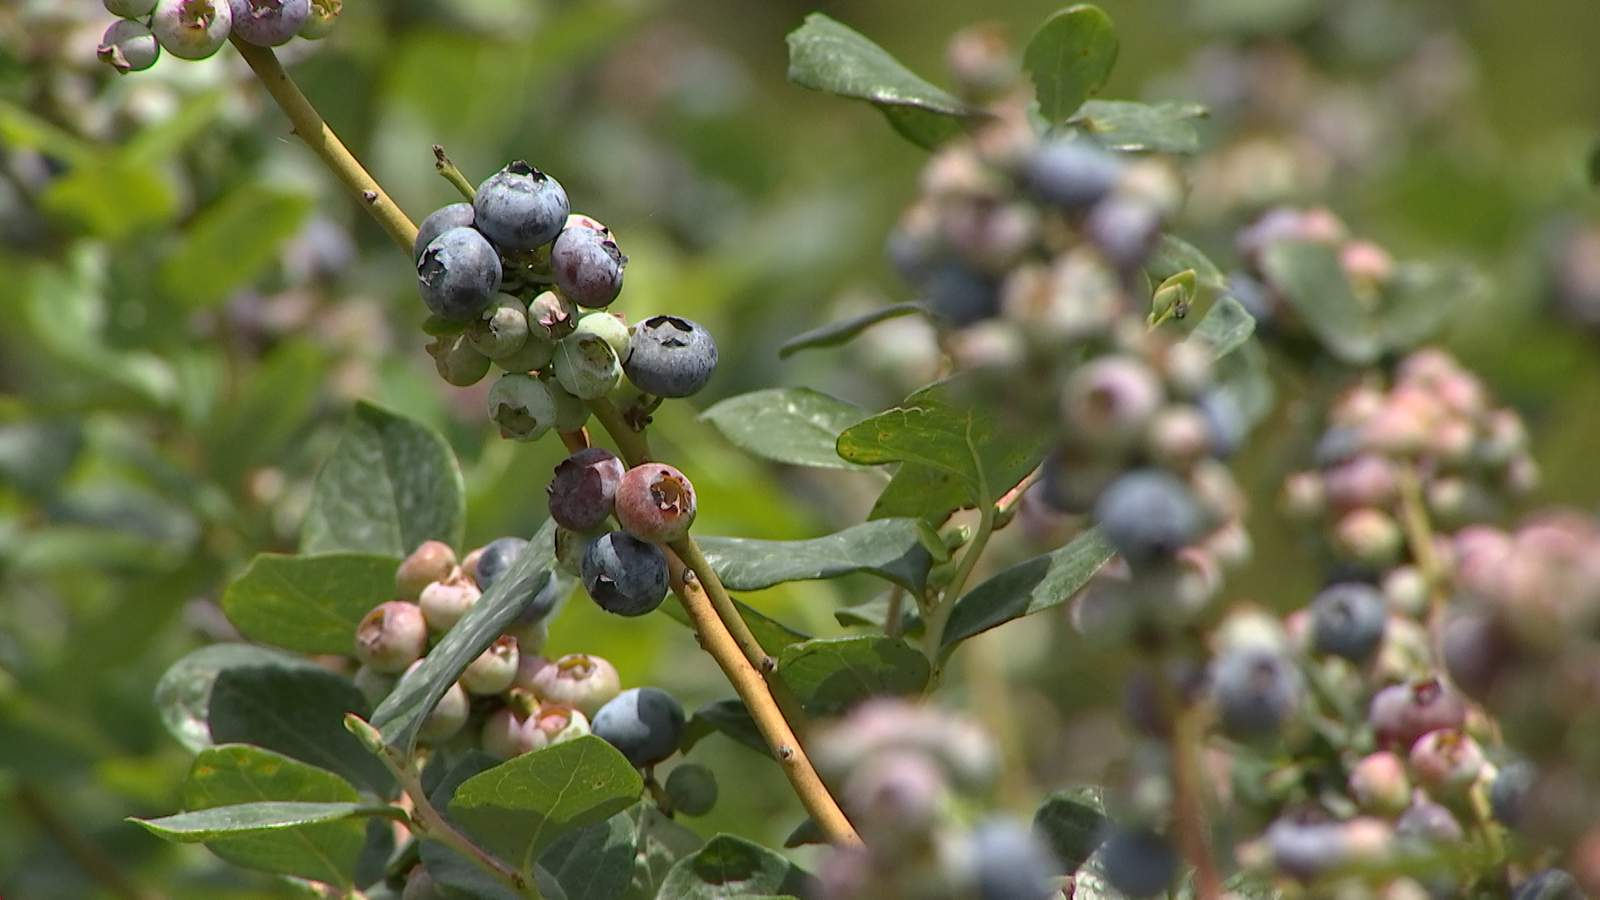 Here’s to the start of a bountiful blueberry season